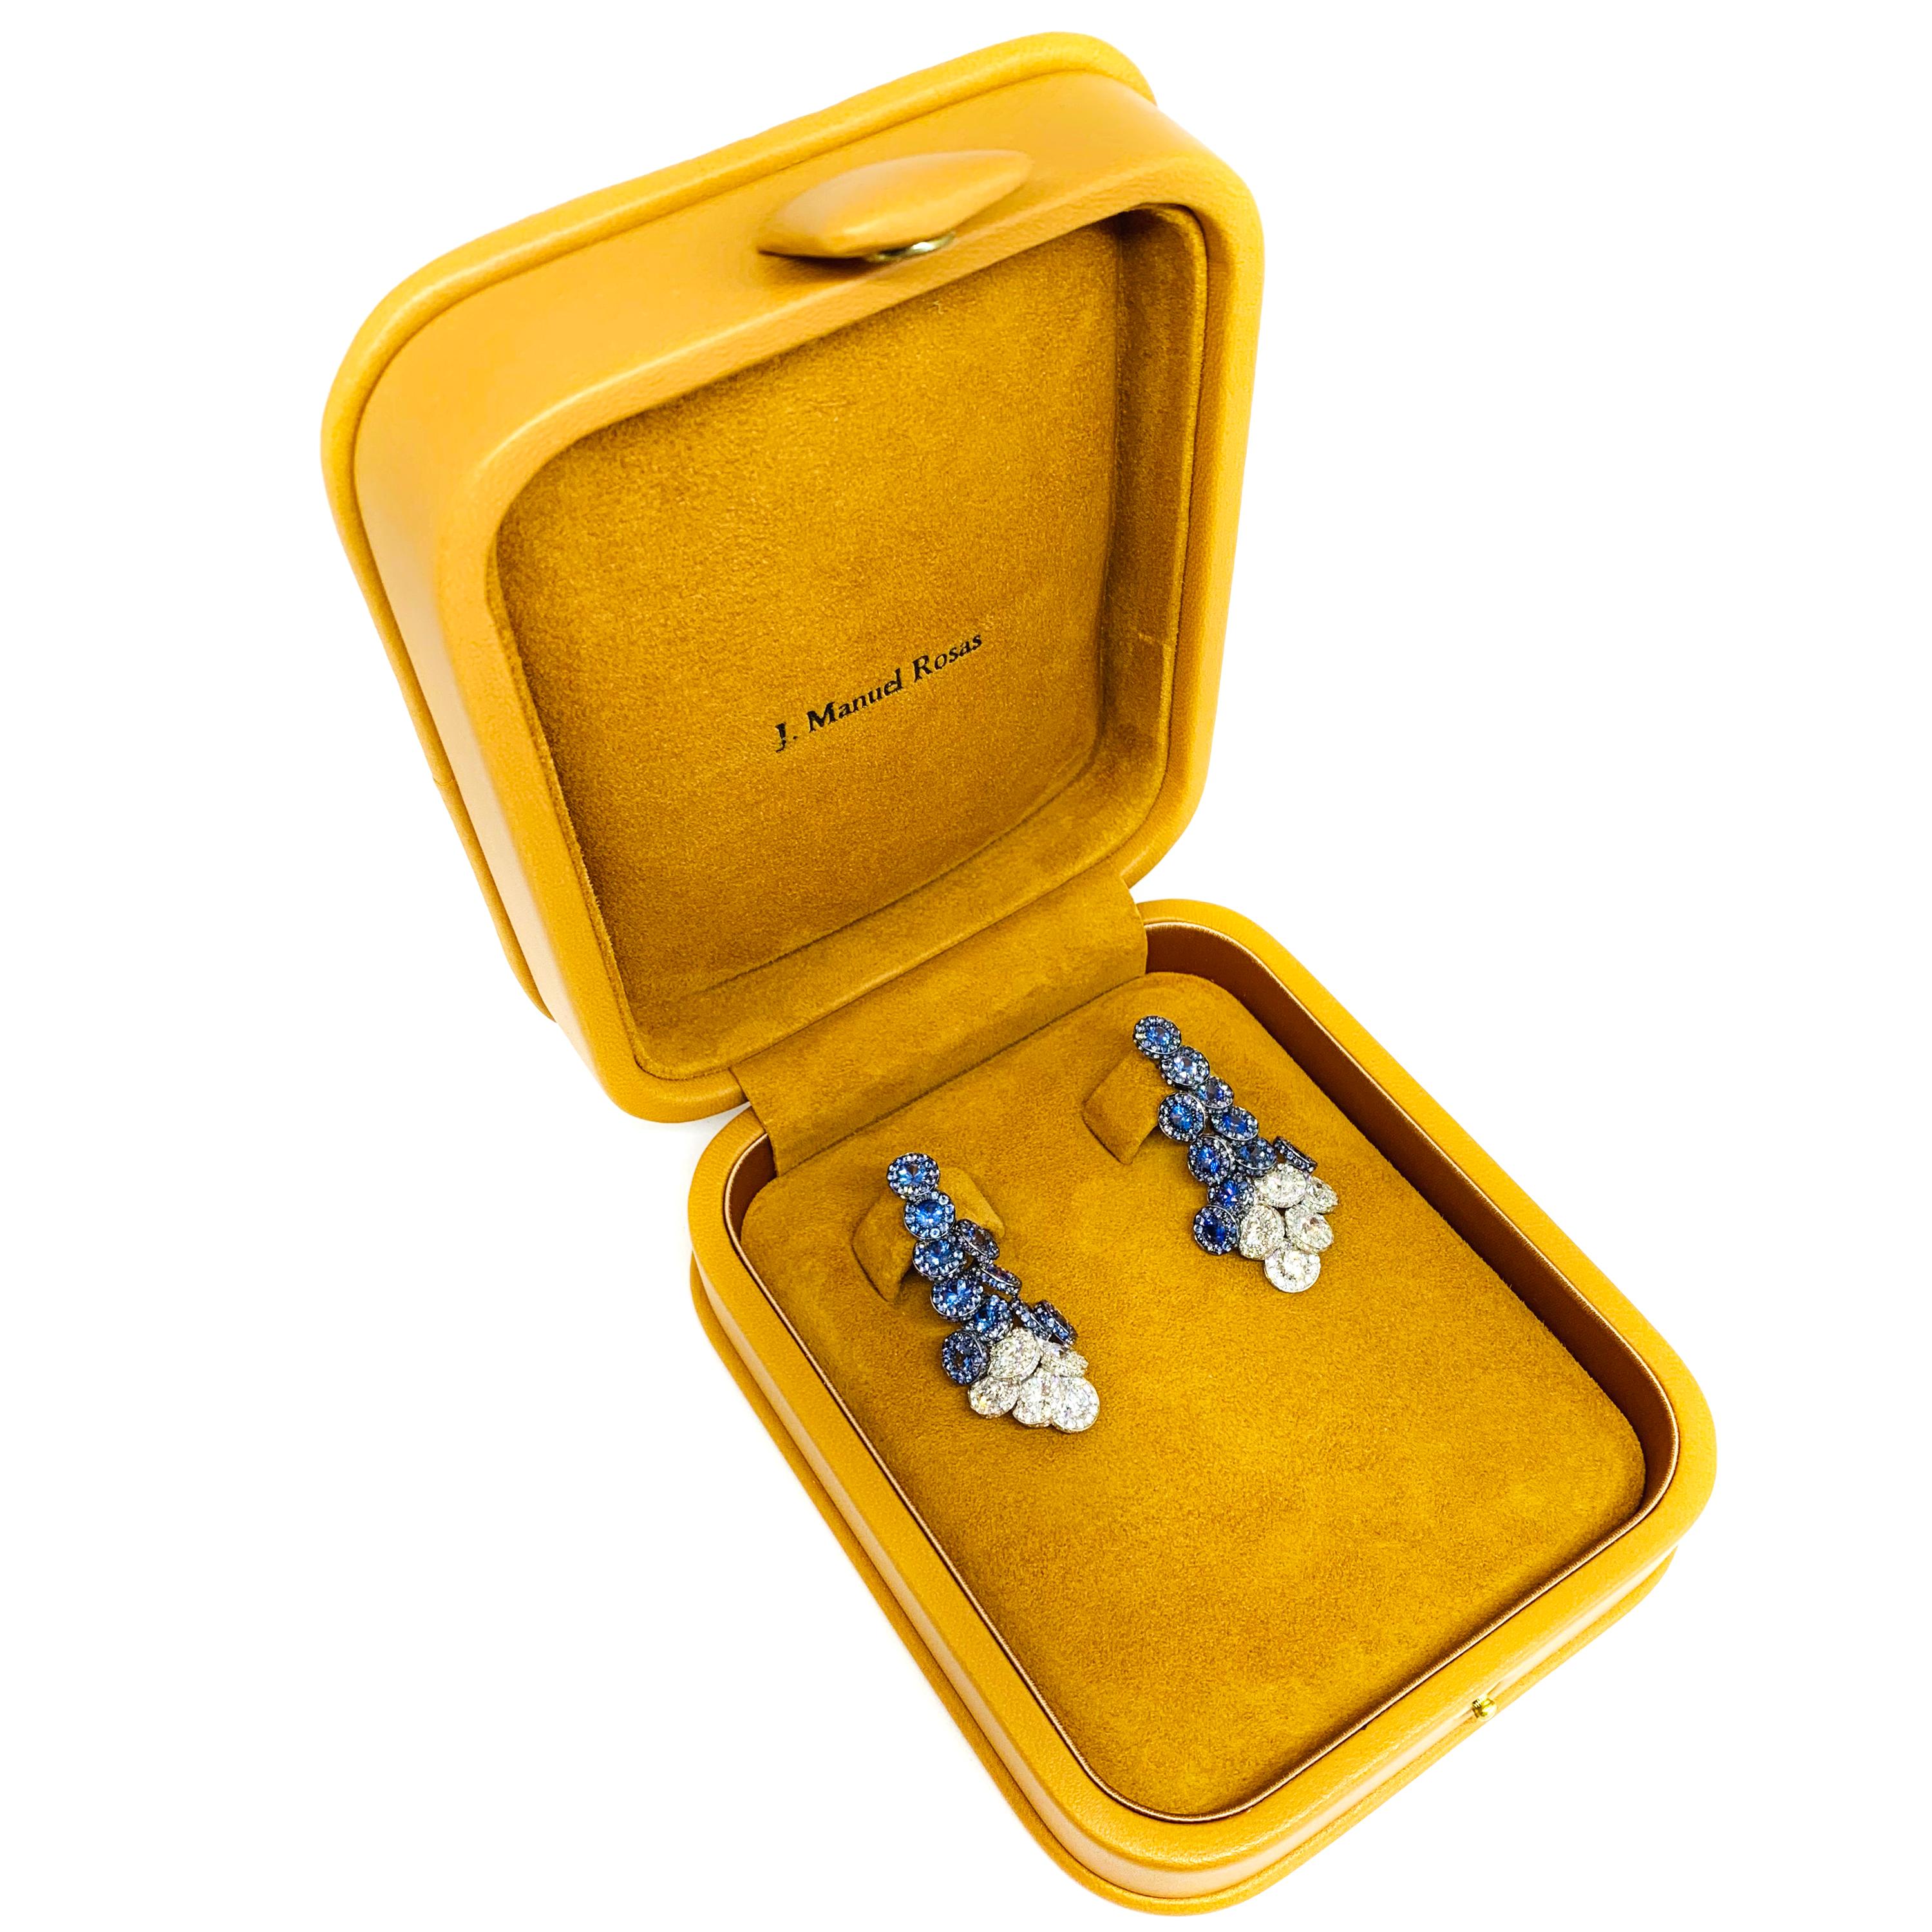 Contemporary Rosior by Manuel Rosas Blue Sapphire and Diamond Drop Earrings set in White Gold